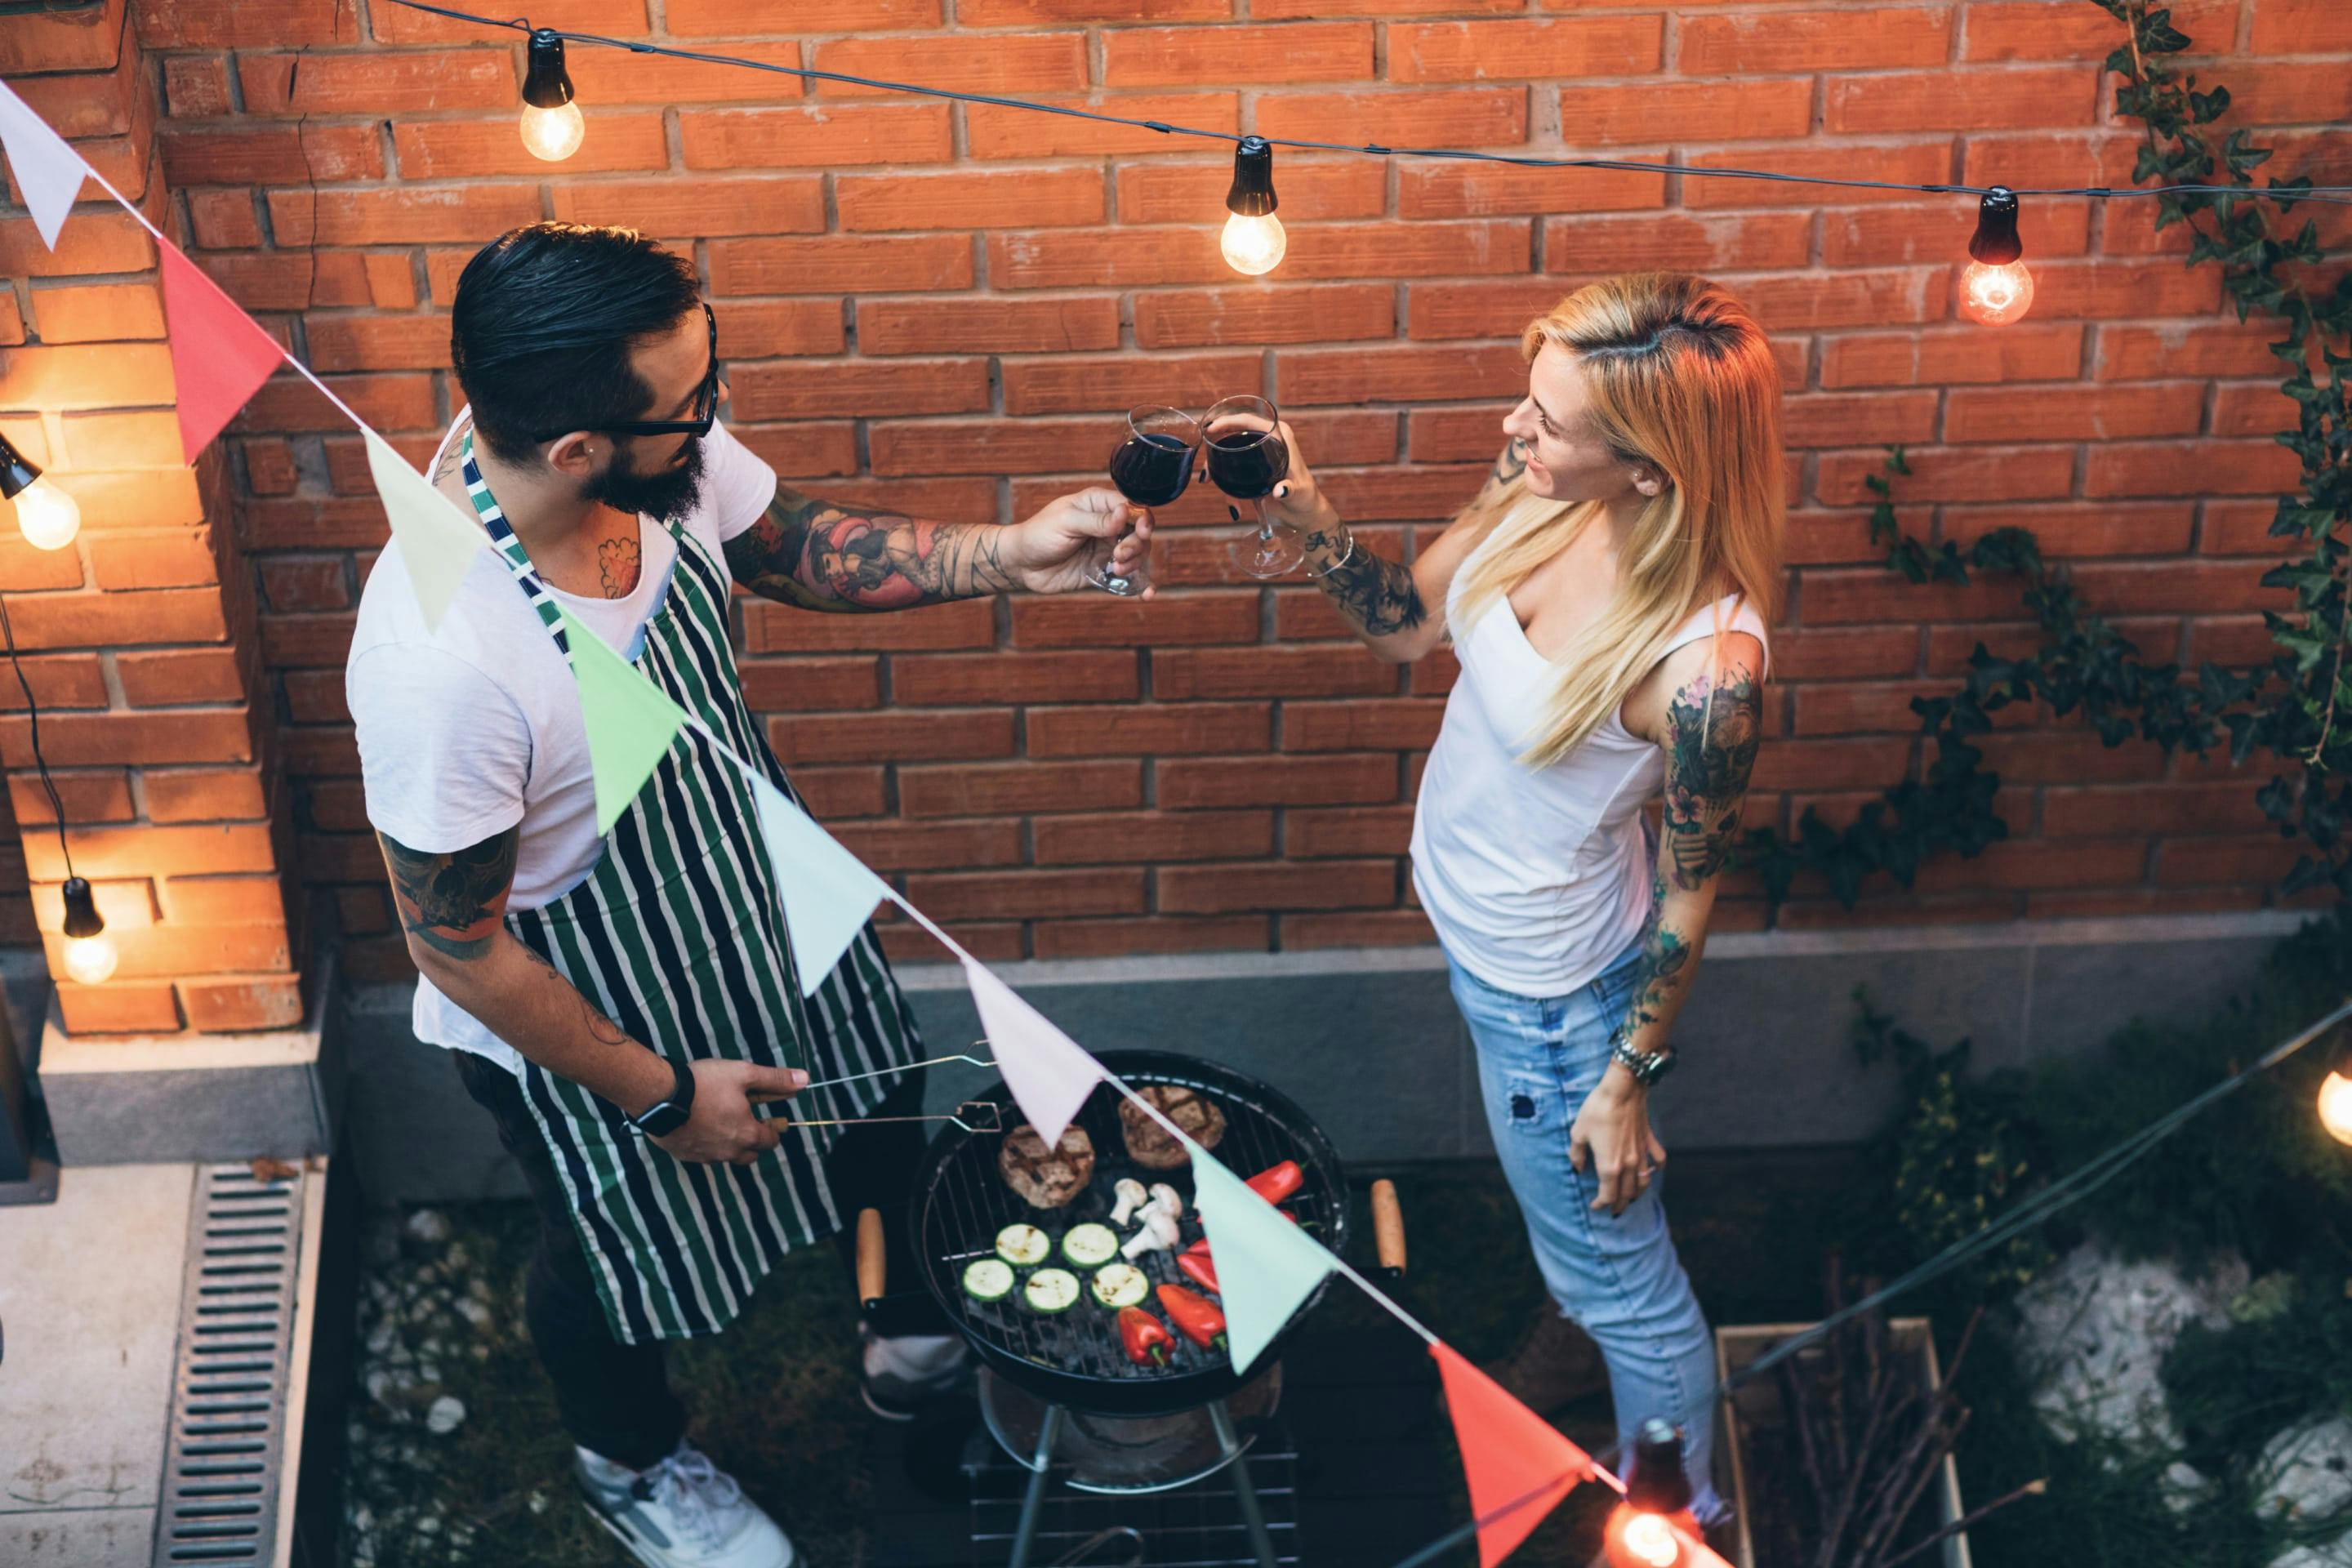 Get tips and tricks for your BBQ date.